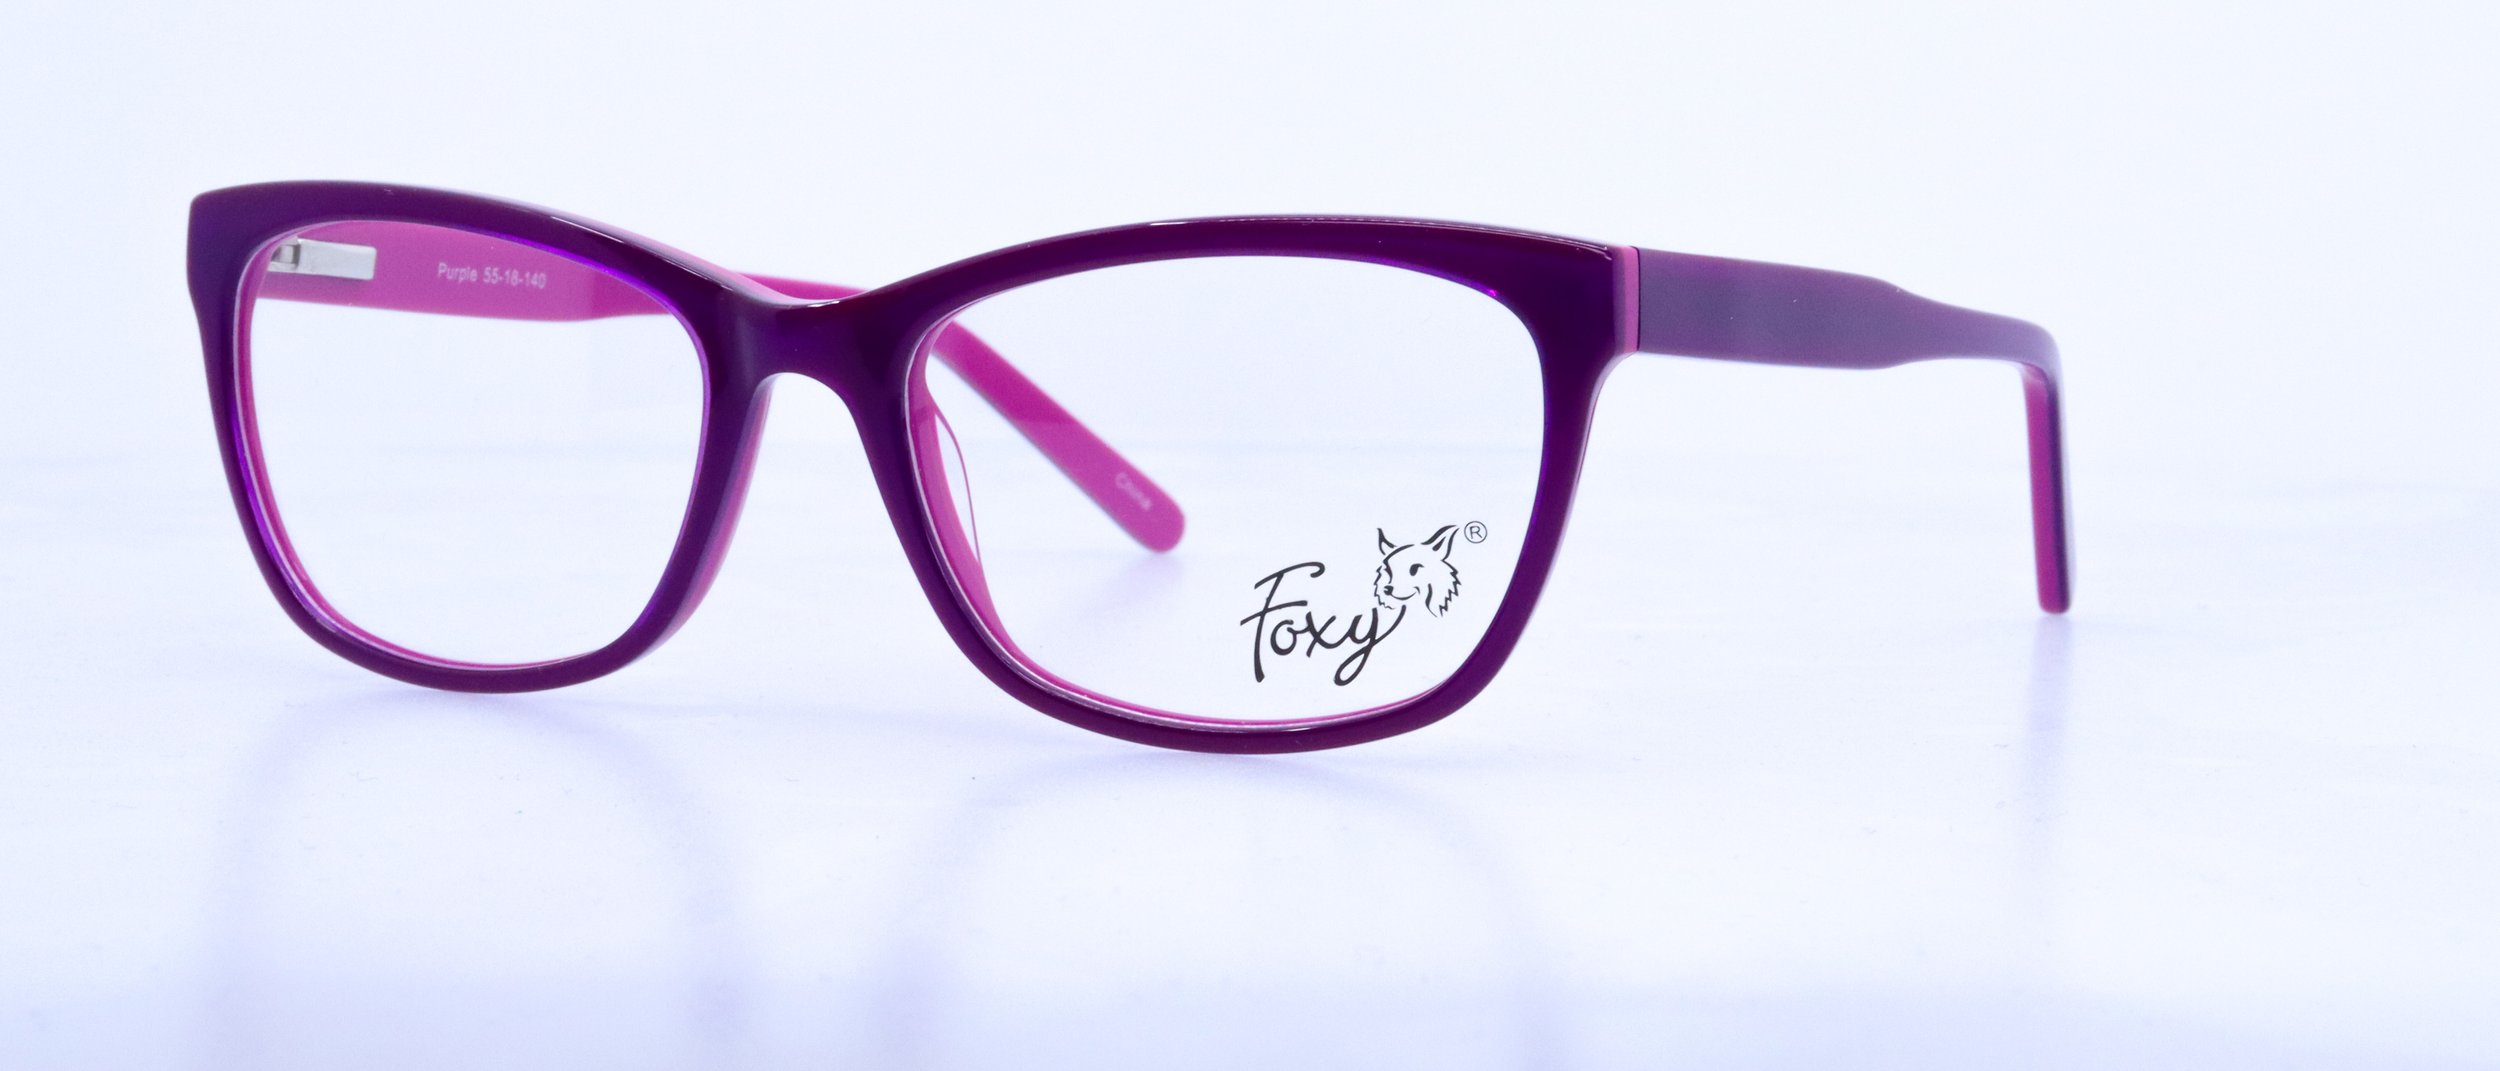  NEW COLOR!! Zoey: 55-18-140, Available in Purple, Burgundy, or Black/Blue 